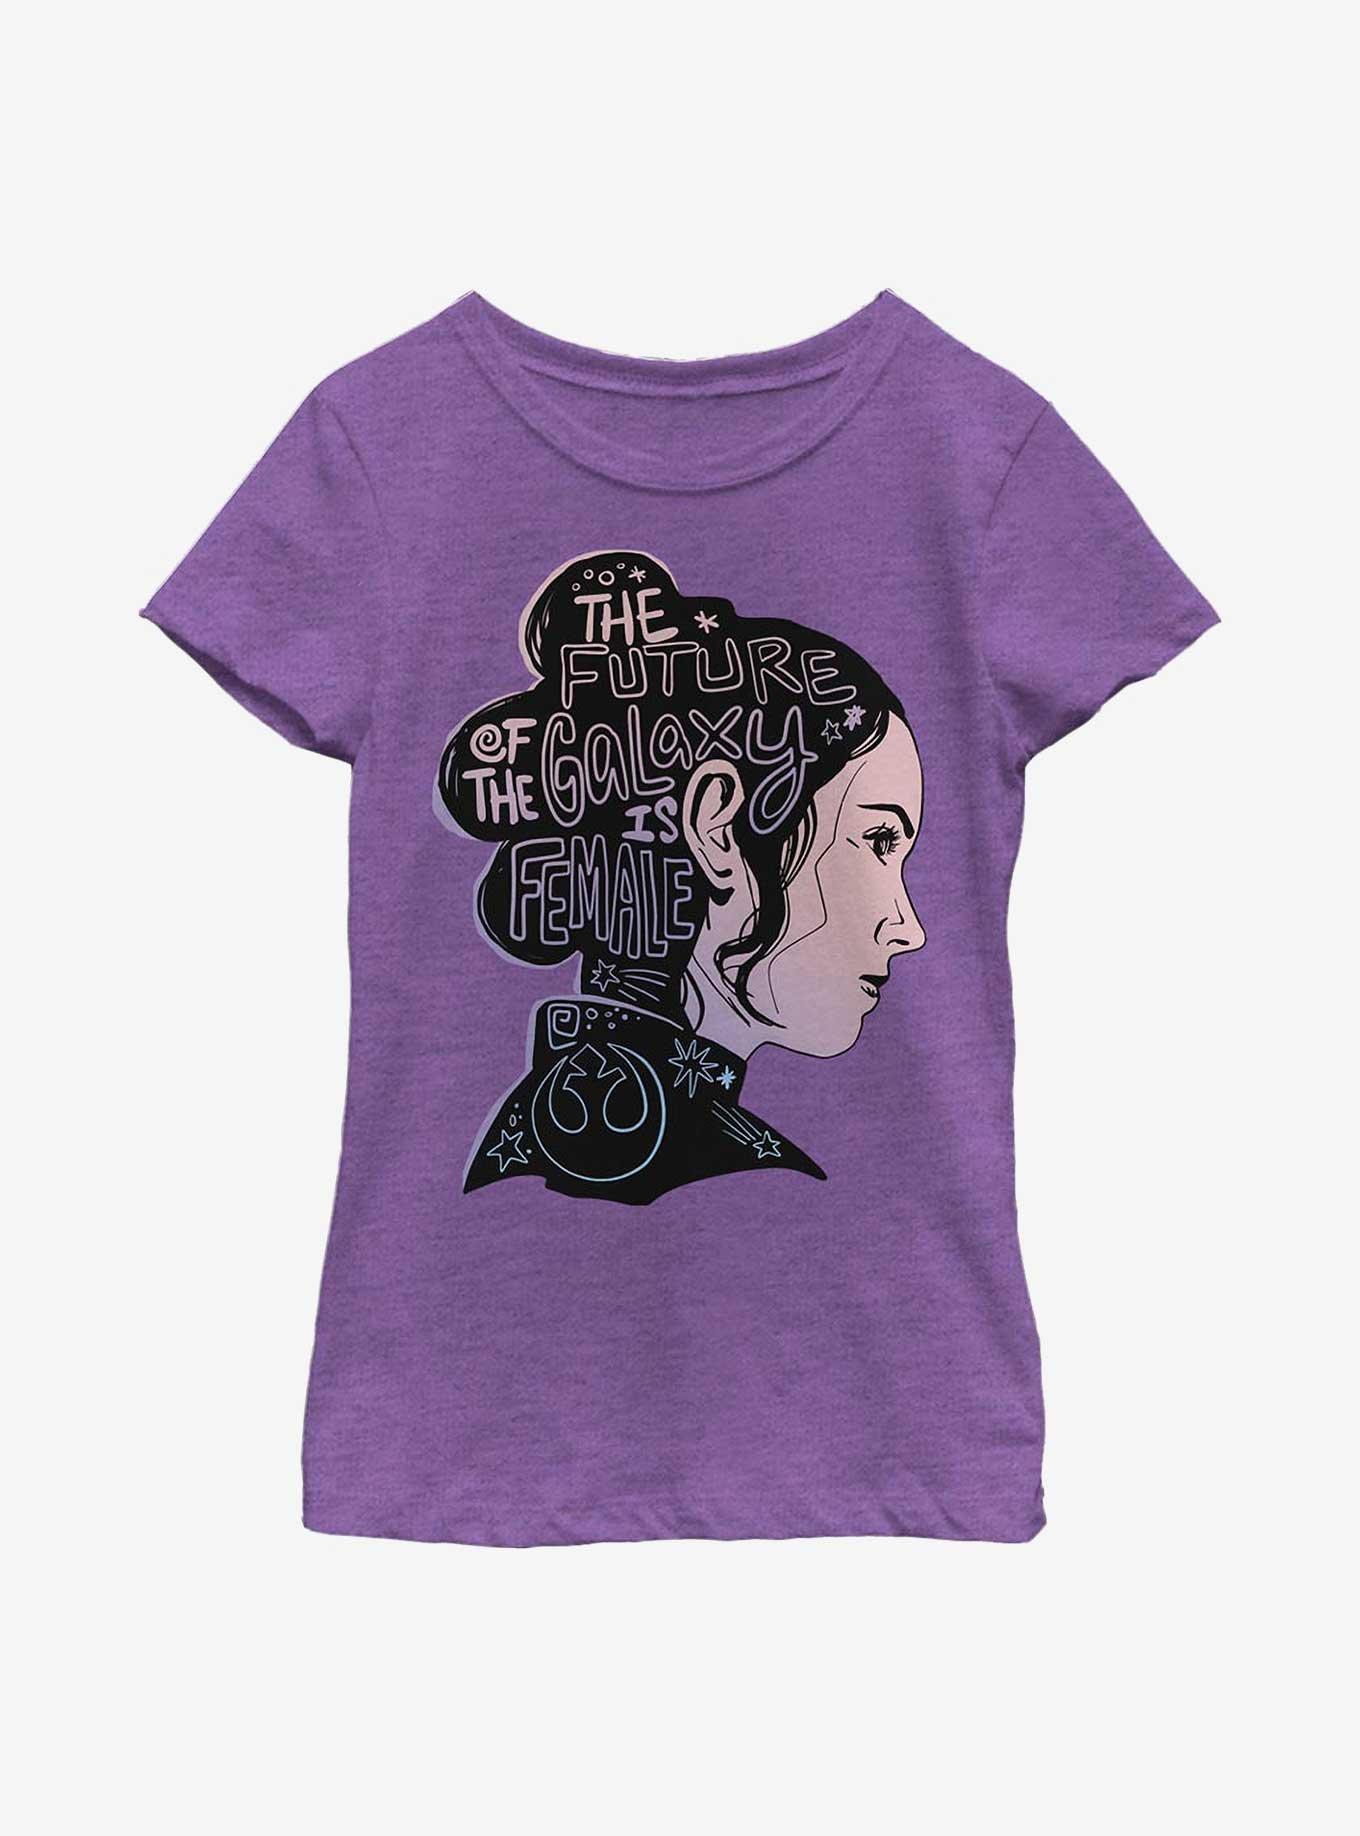 Star Wars Episode IX: The Rise Of Skywalker Female Future Silhouette Youth Girls T-Shirt, PURPLE BERRY, hi-res